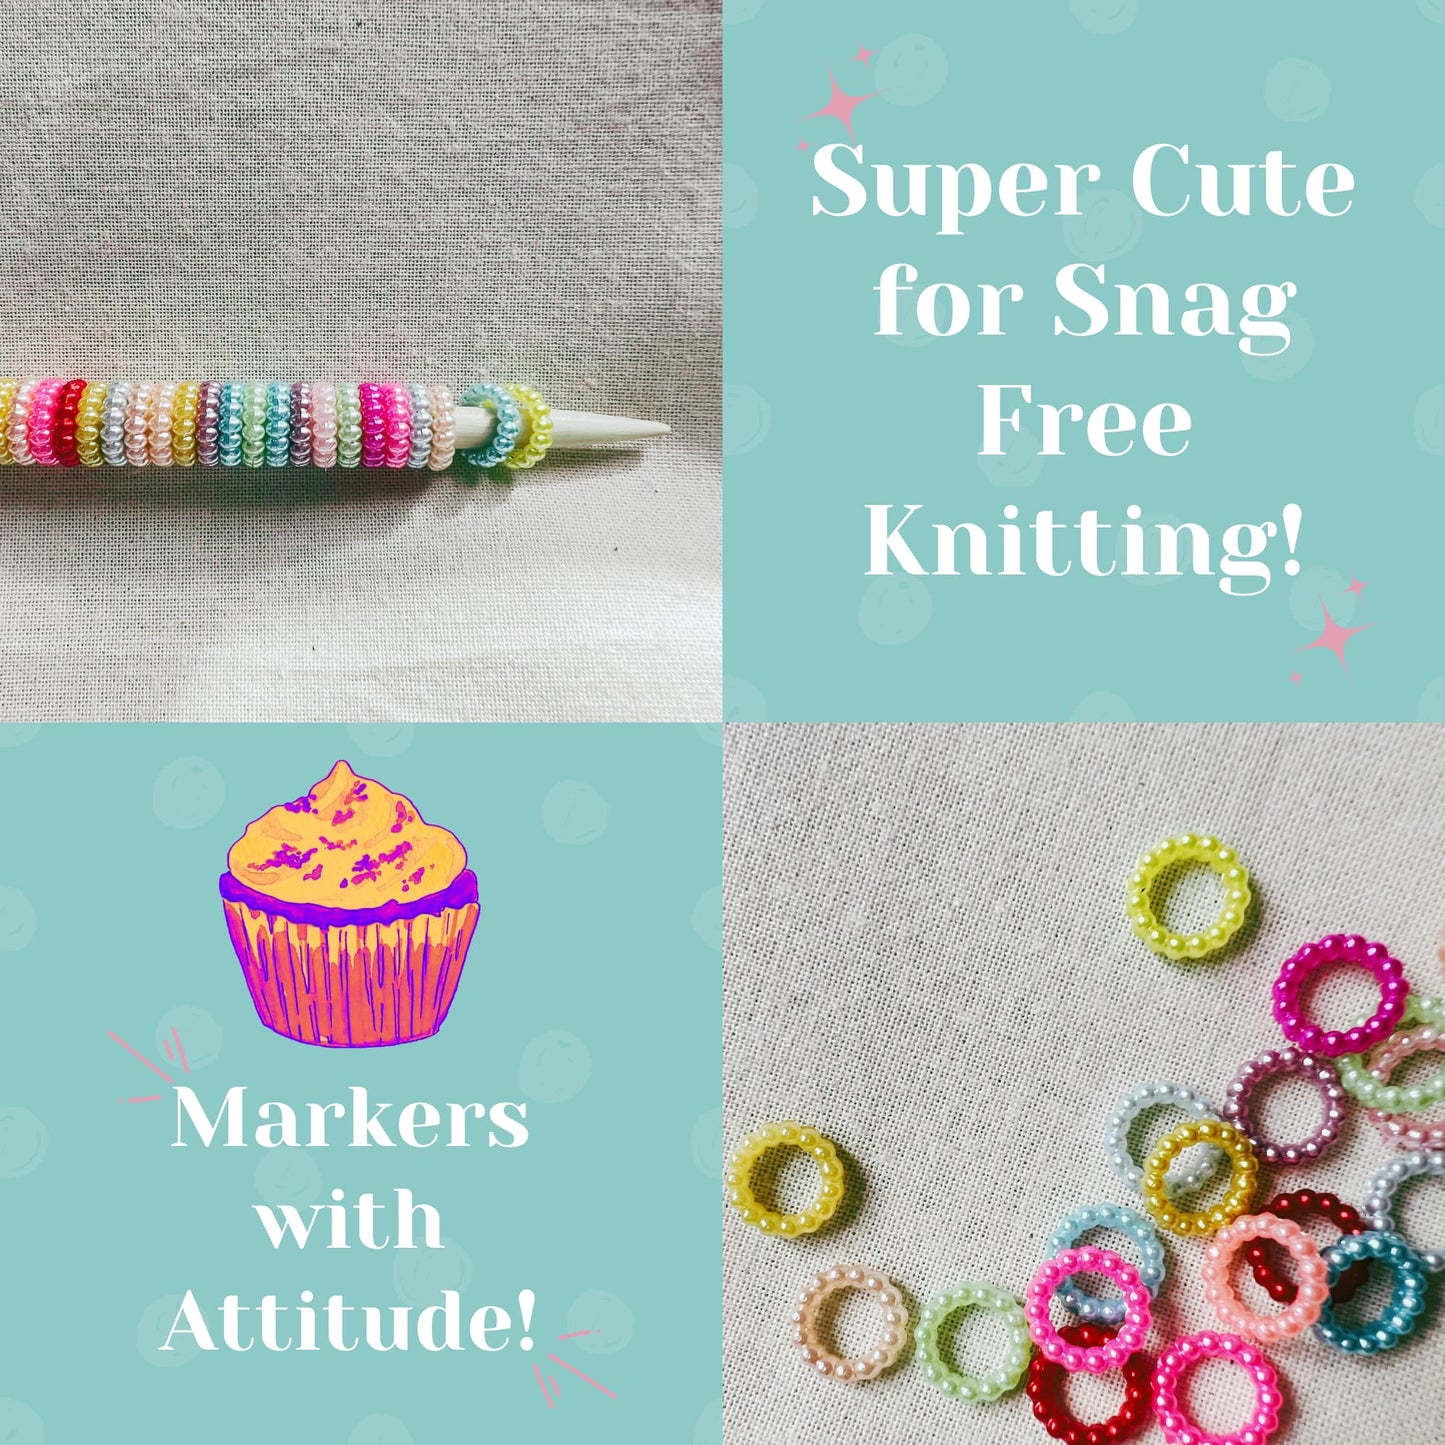 Pastel Stitch Markers for Knitting Snag-Free - Frosting Hoops